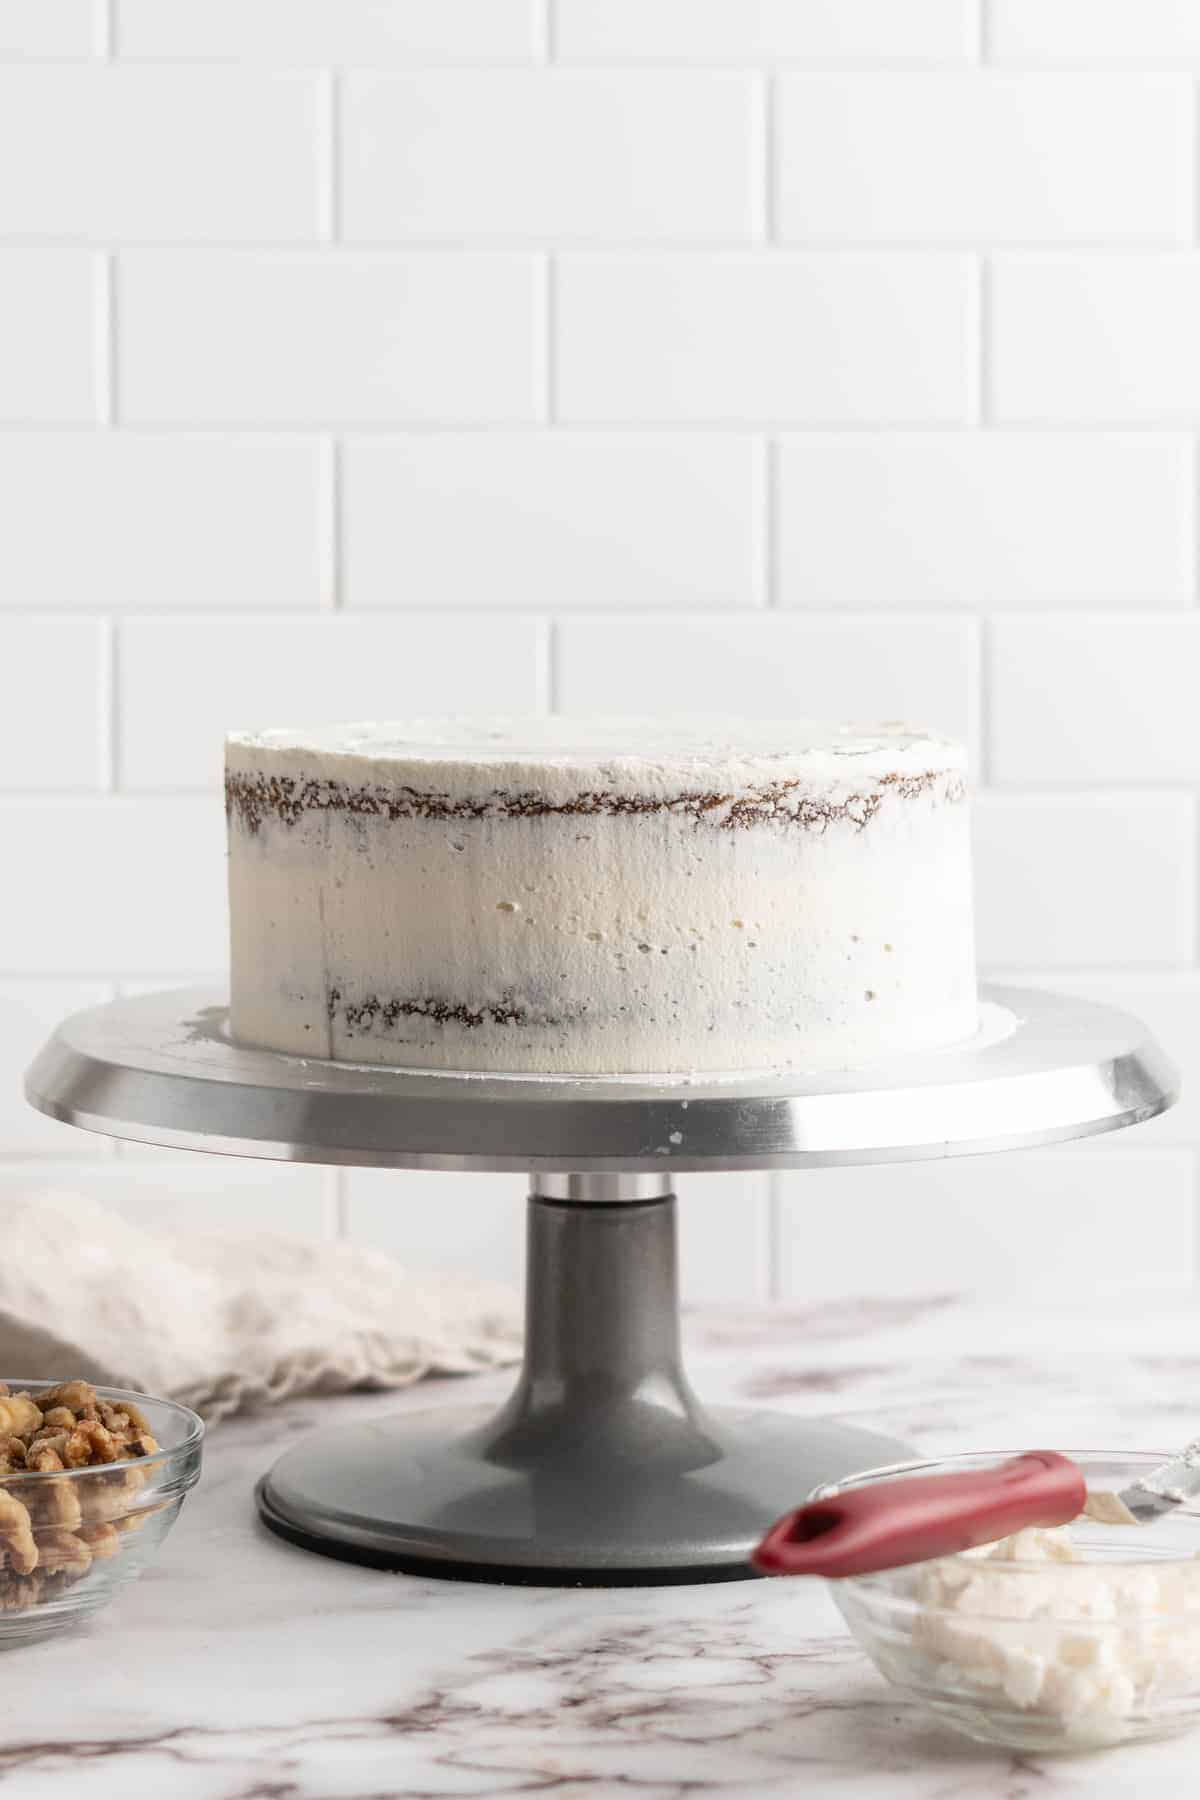 Frosting vegan carrot cake on cake stand